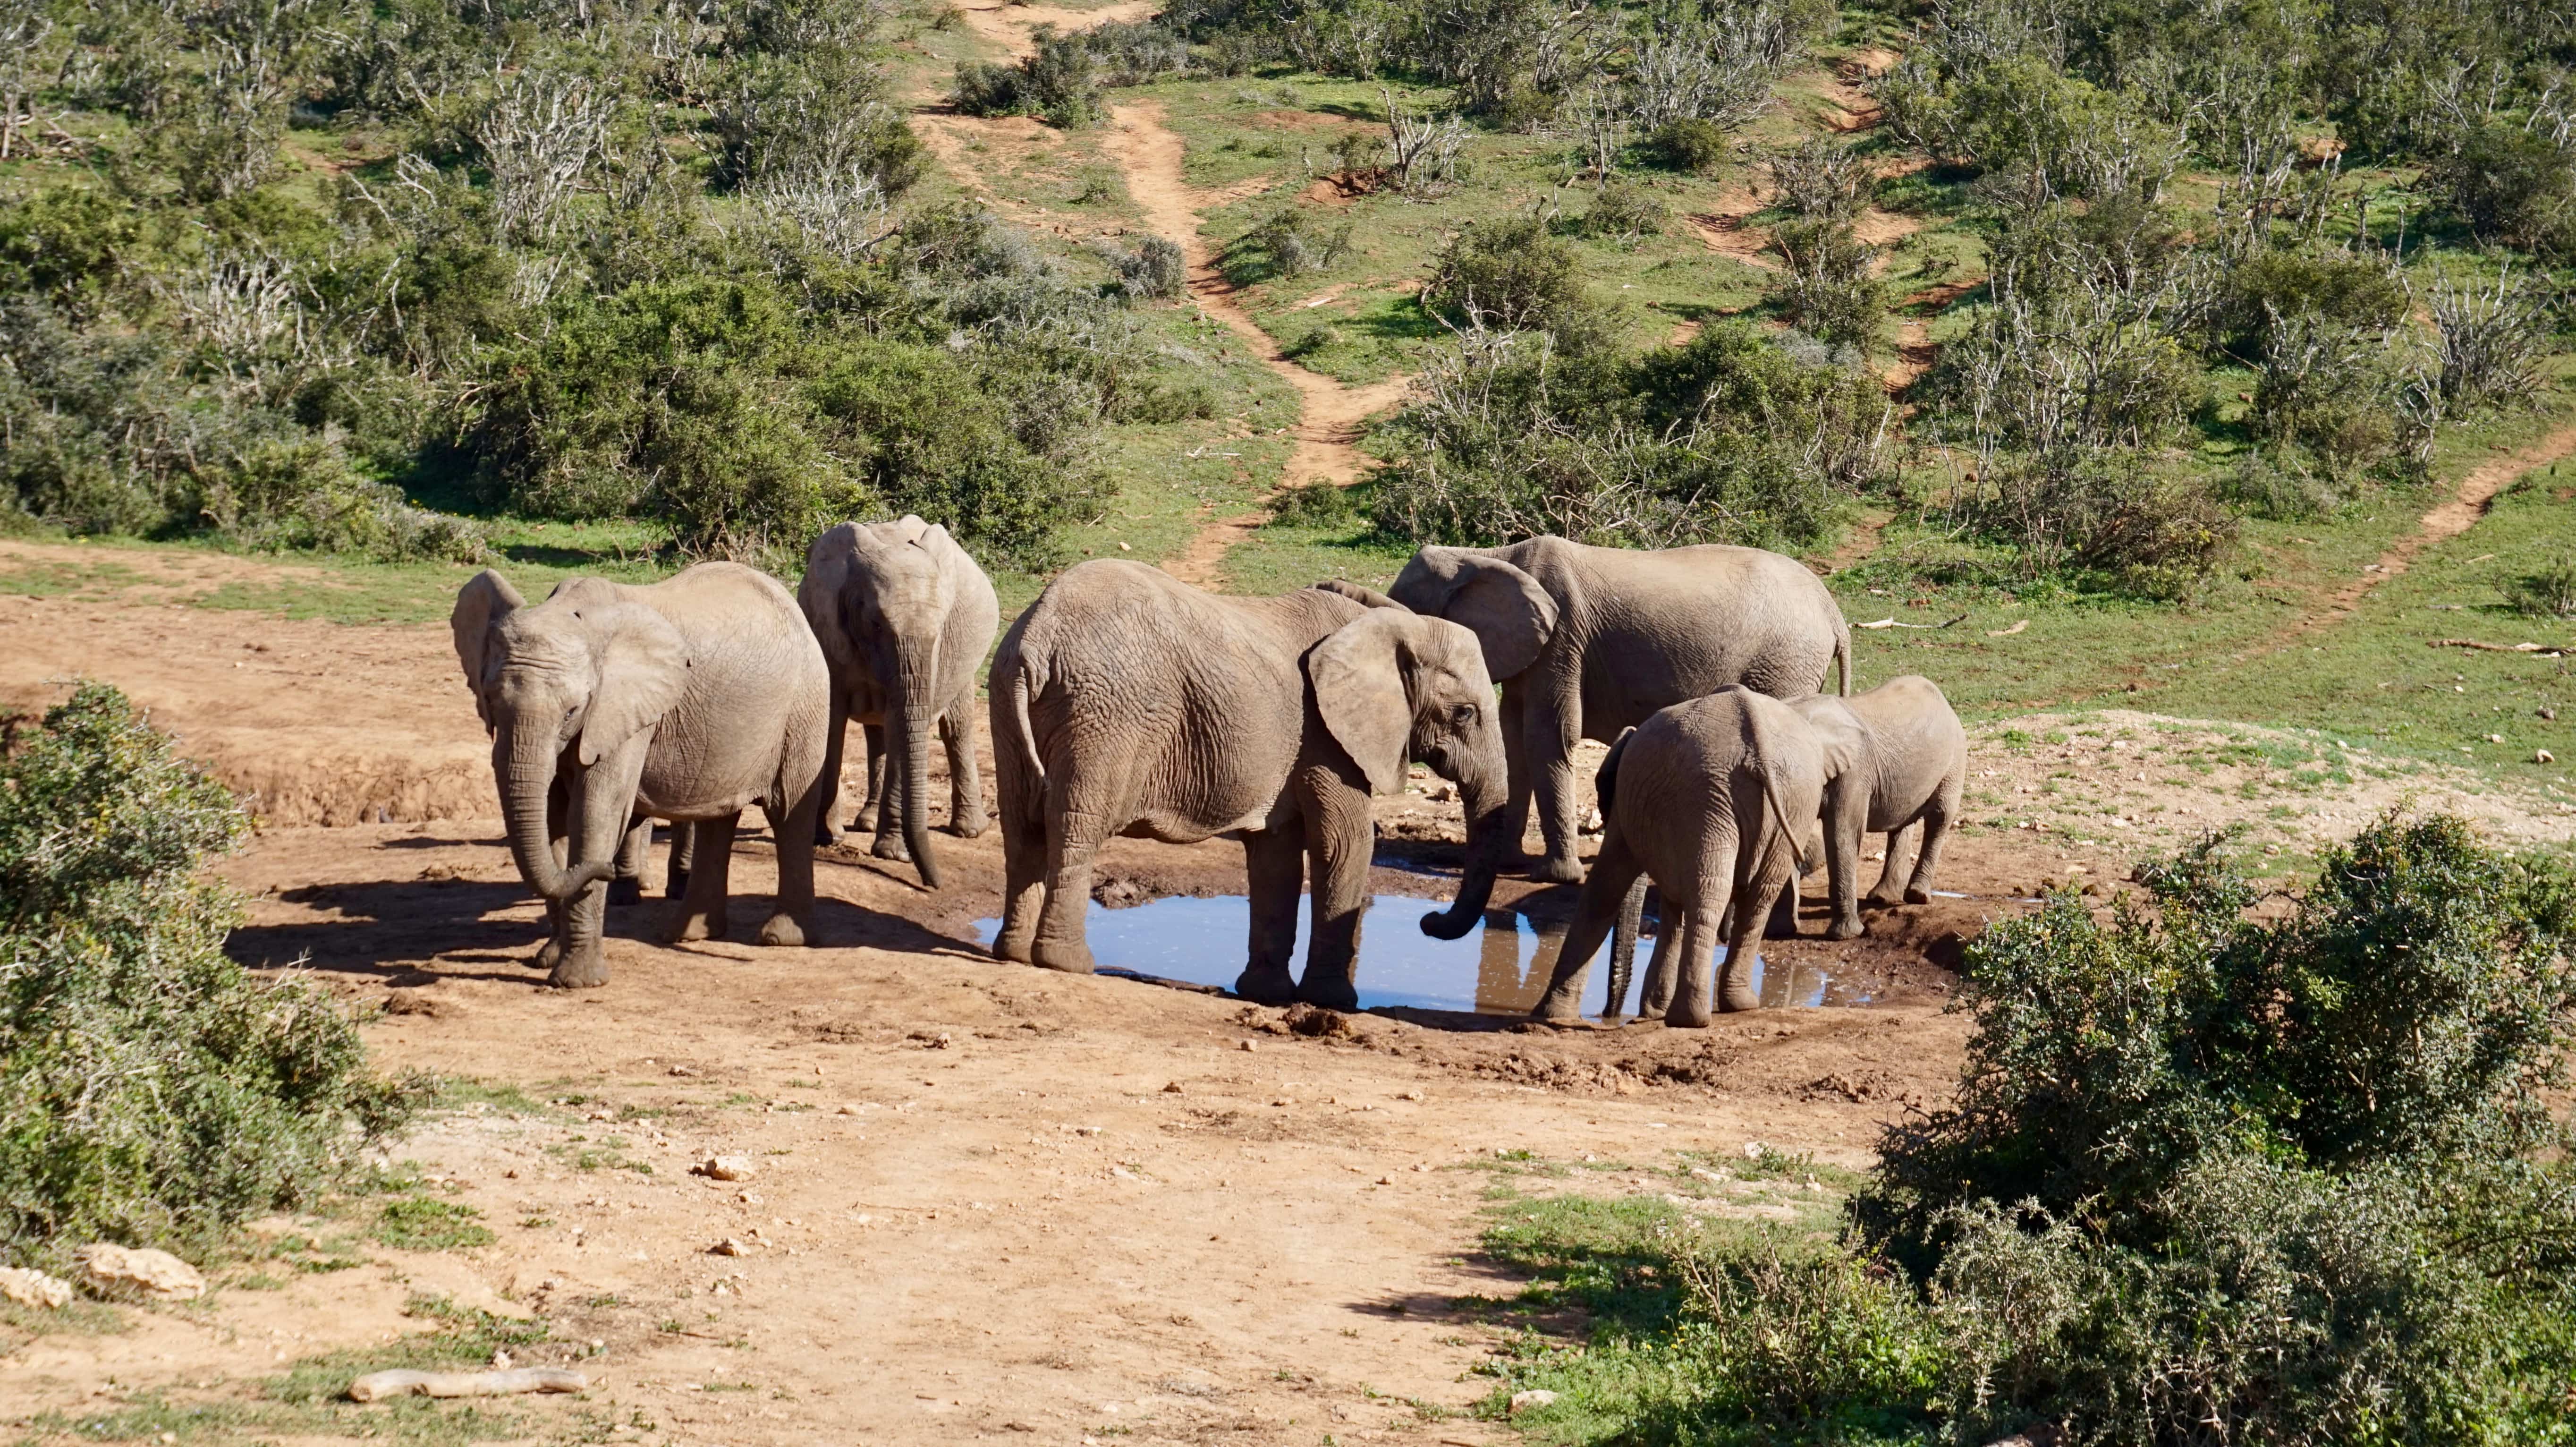 Elephants at the water hole in Addo Elephant National Park, South Africa